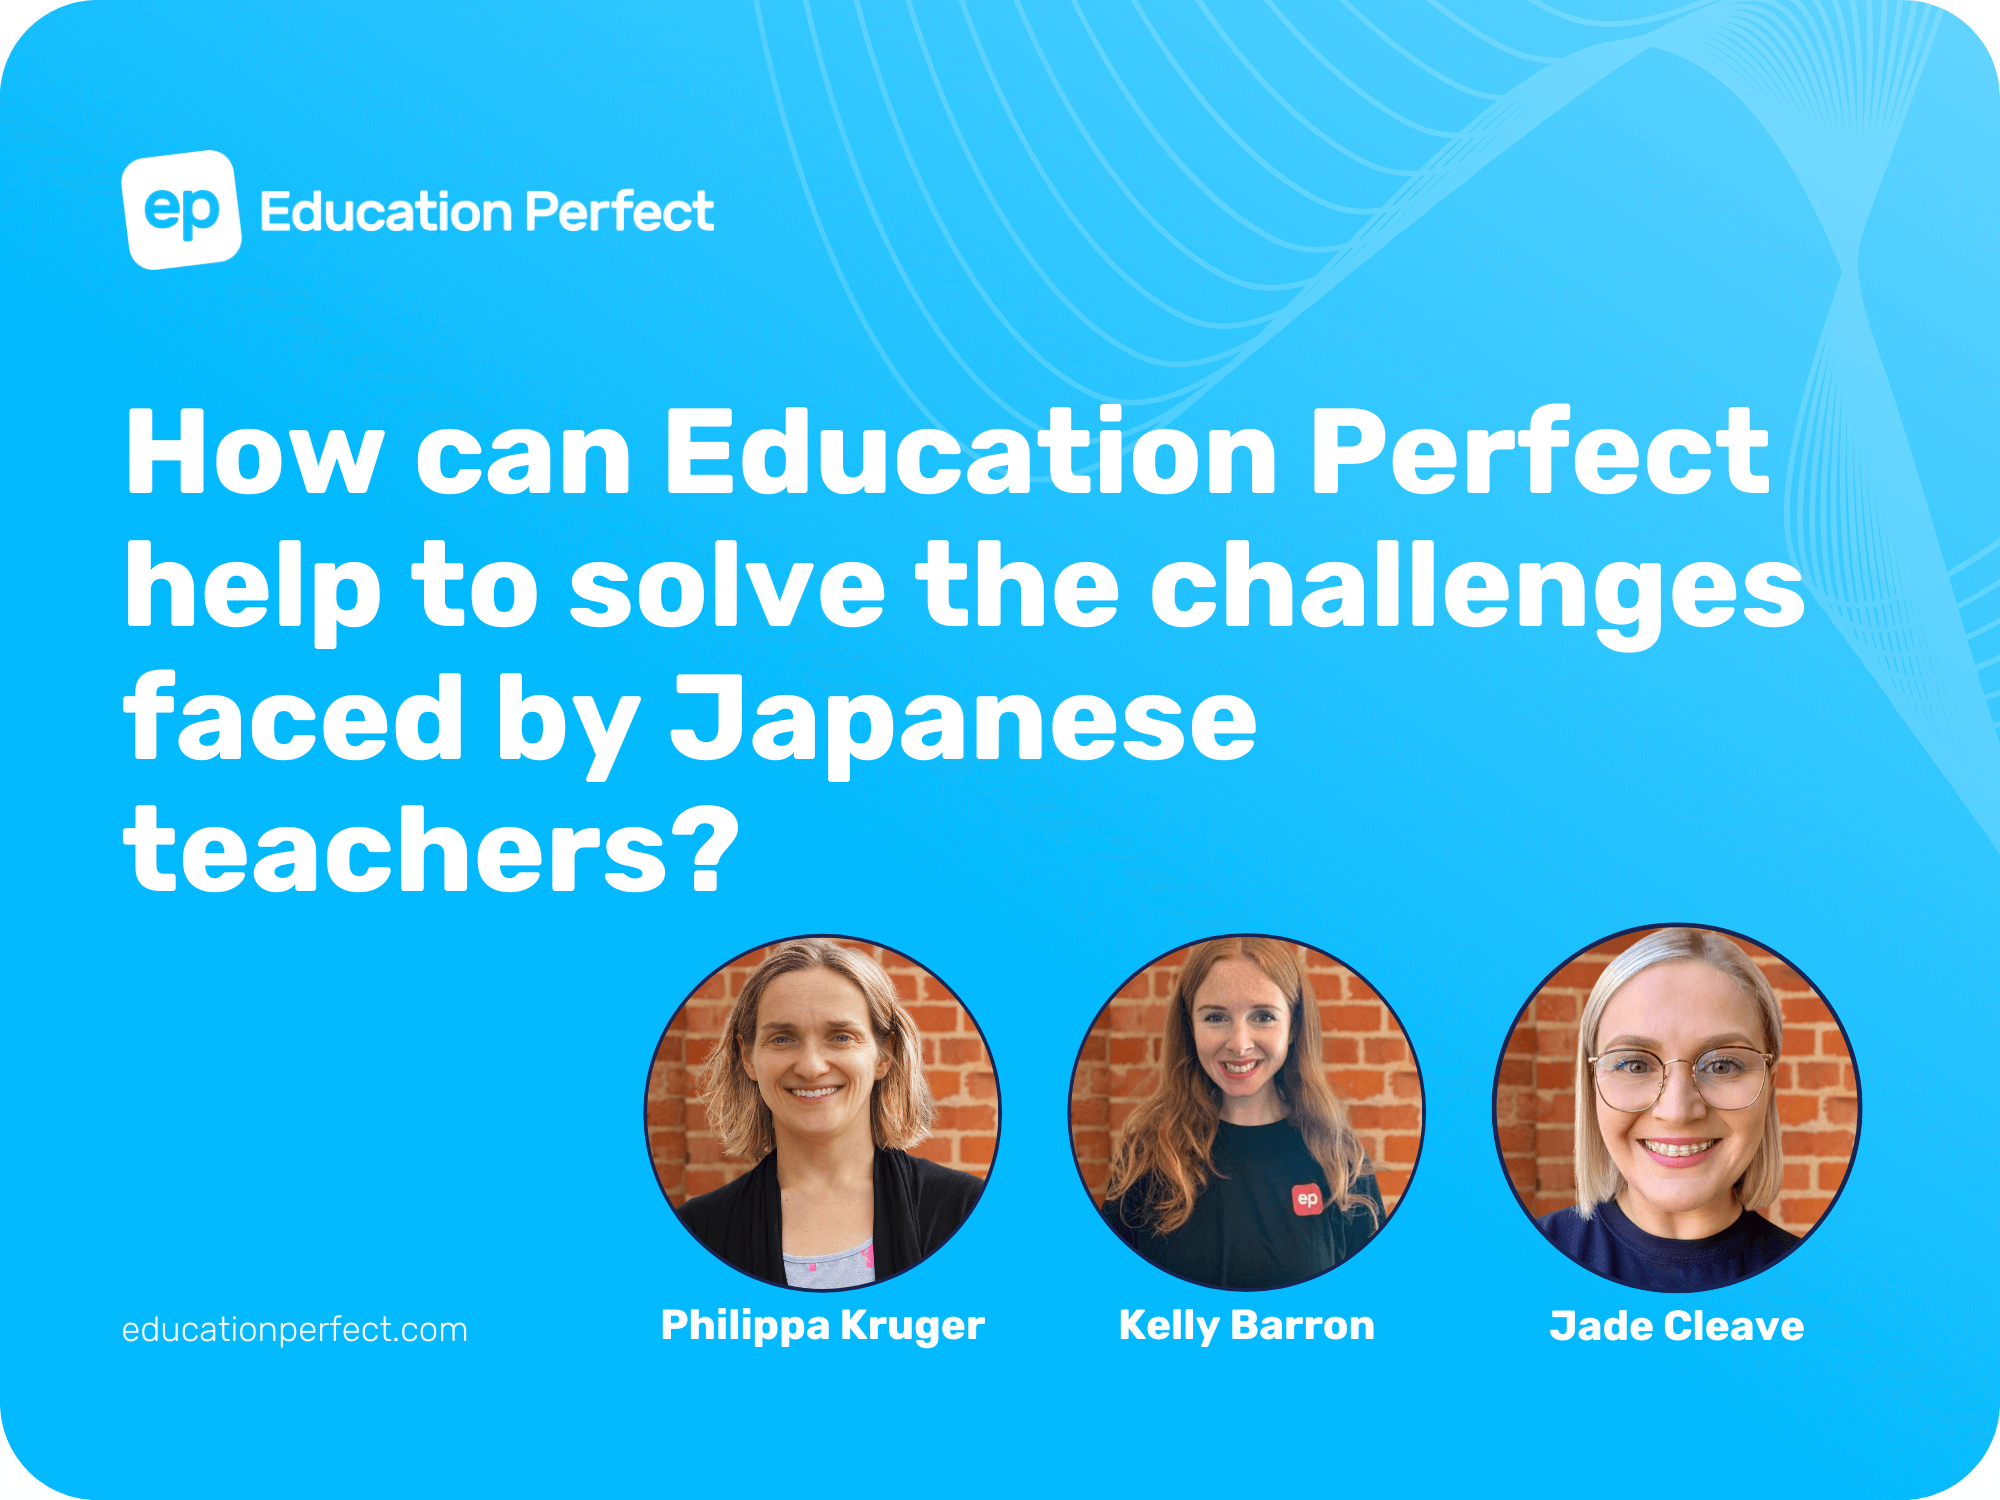 How can EP help to solve the challenges faced by Japanese teachers?